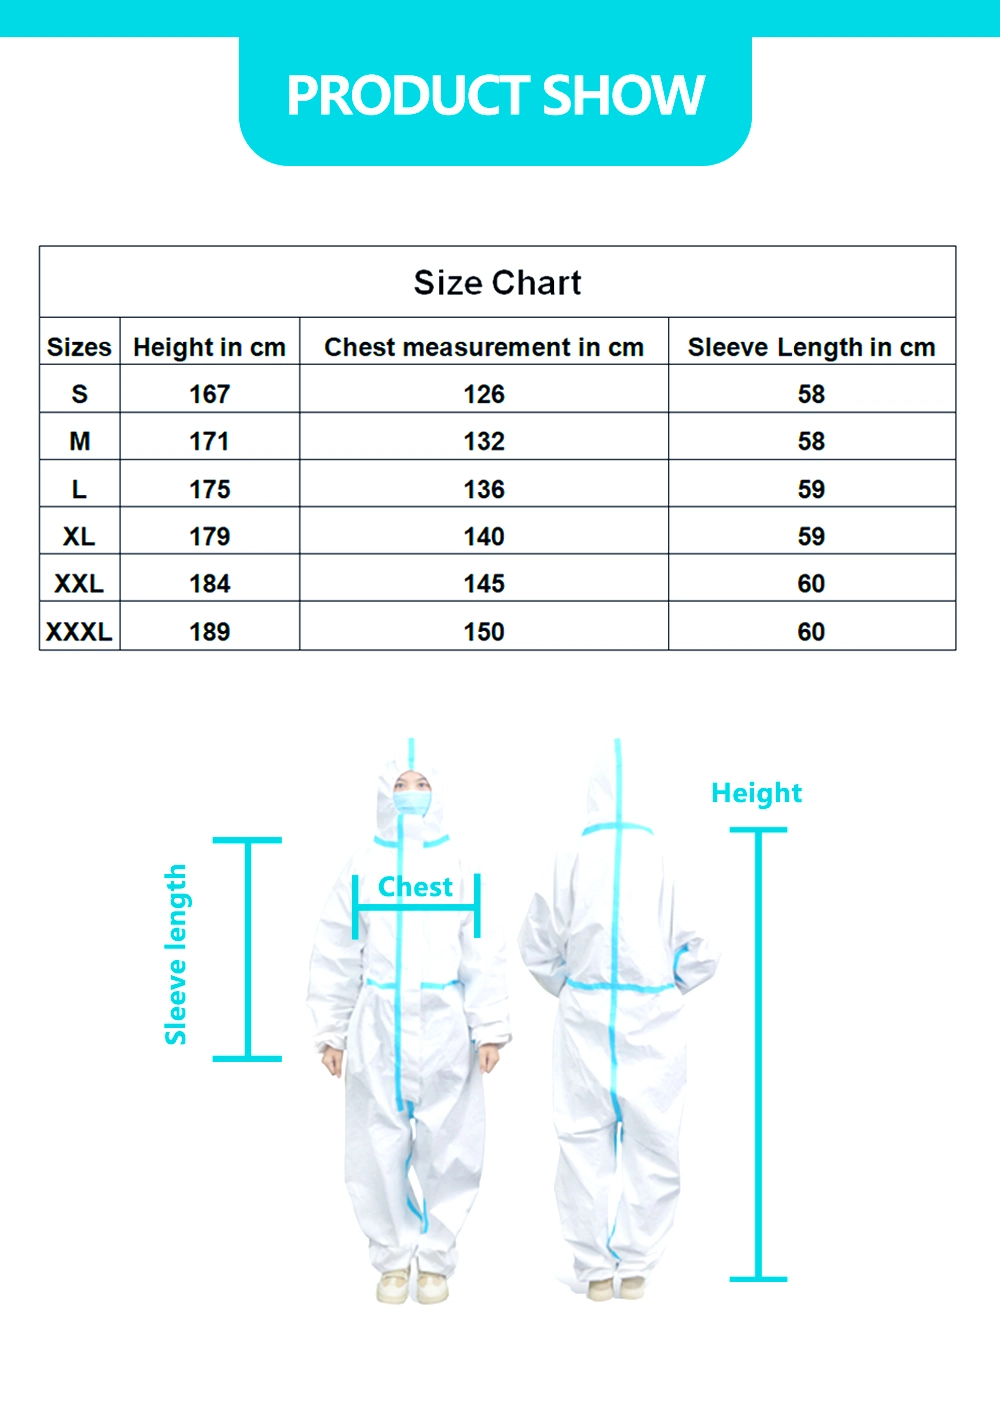 PP PE Isolation Gown for Medical Disposable Medical Non Woven SMS Isolation Gowns Level 1